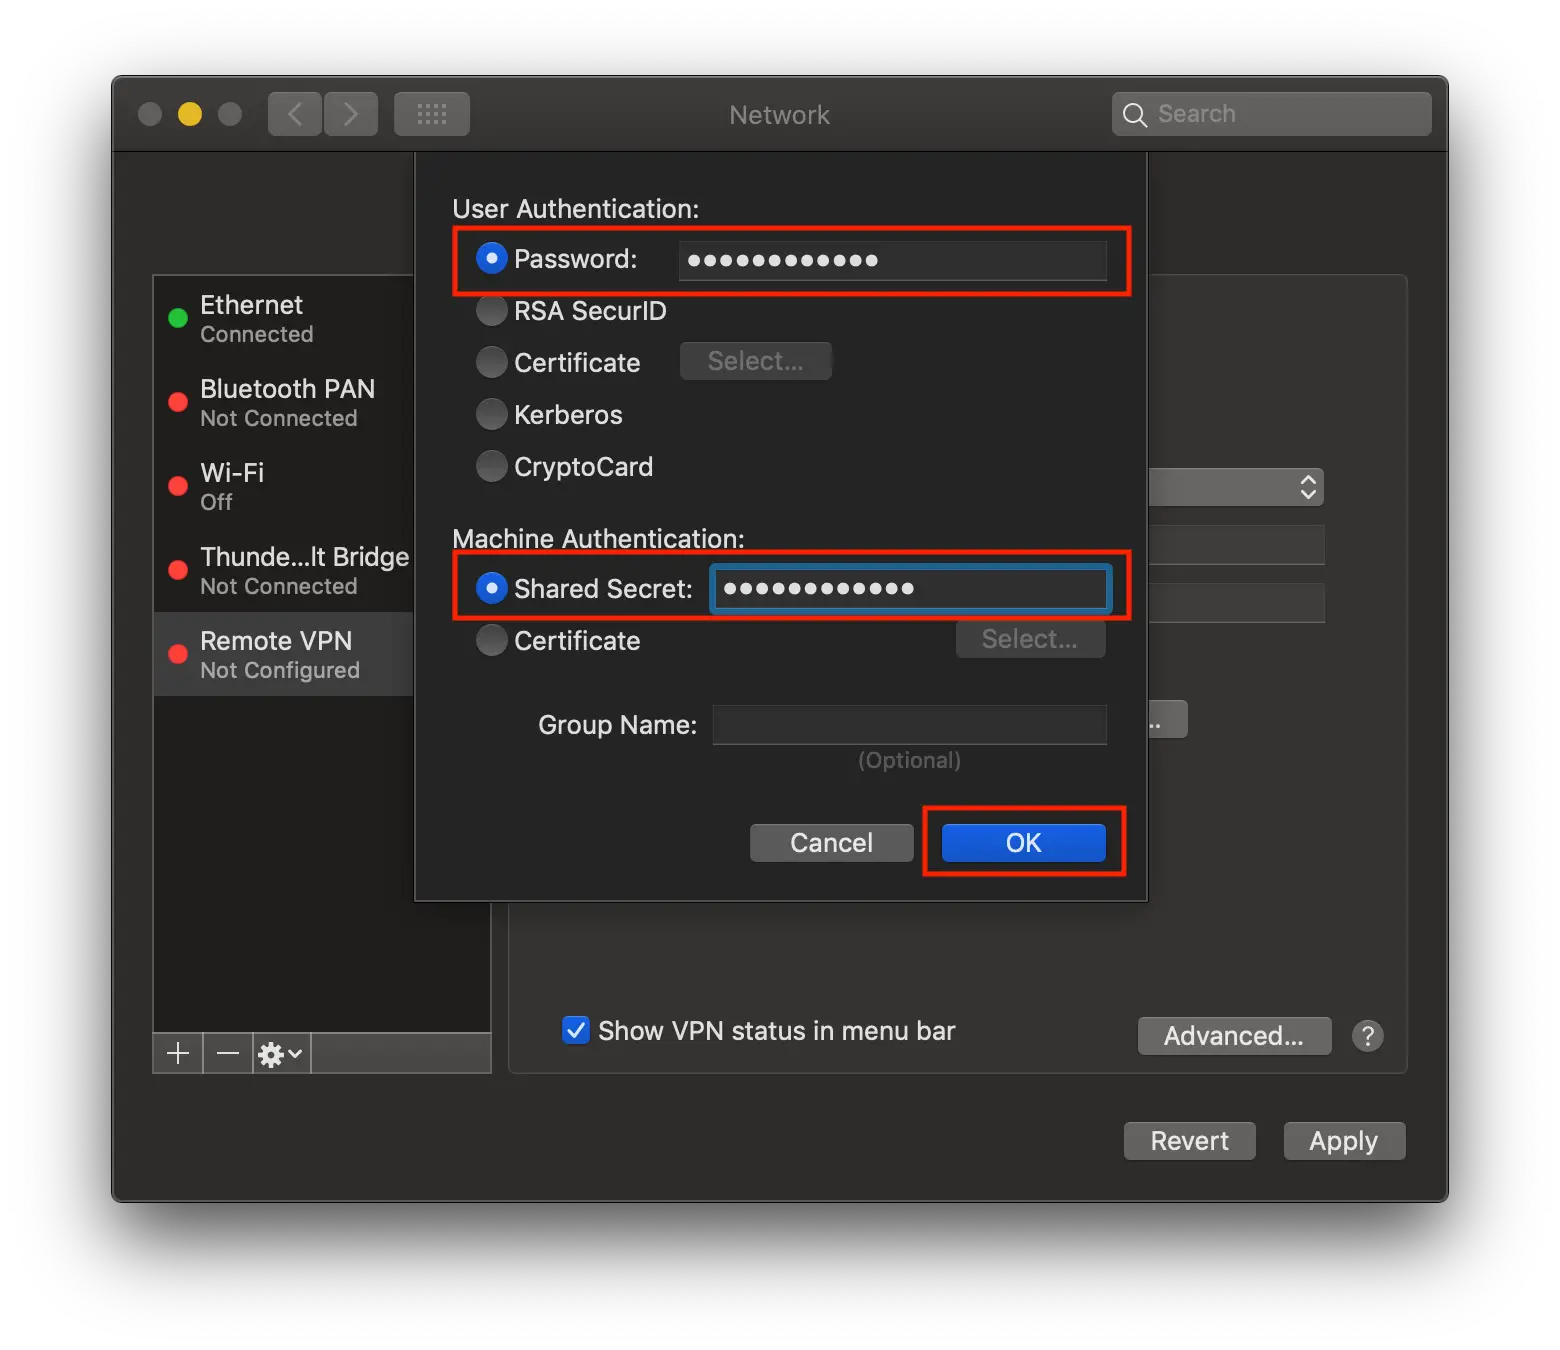 macos network authentication settings screen